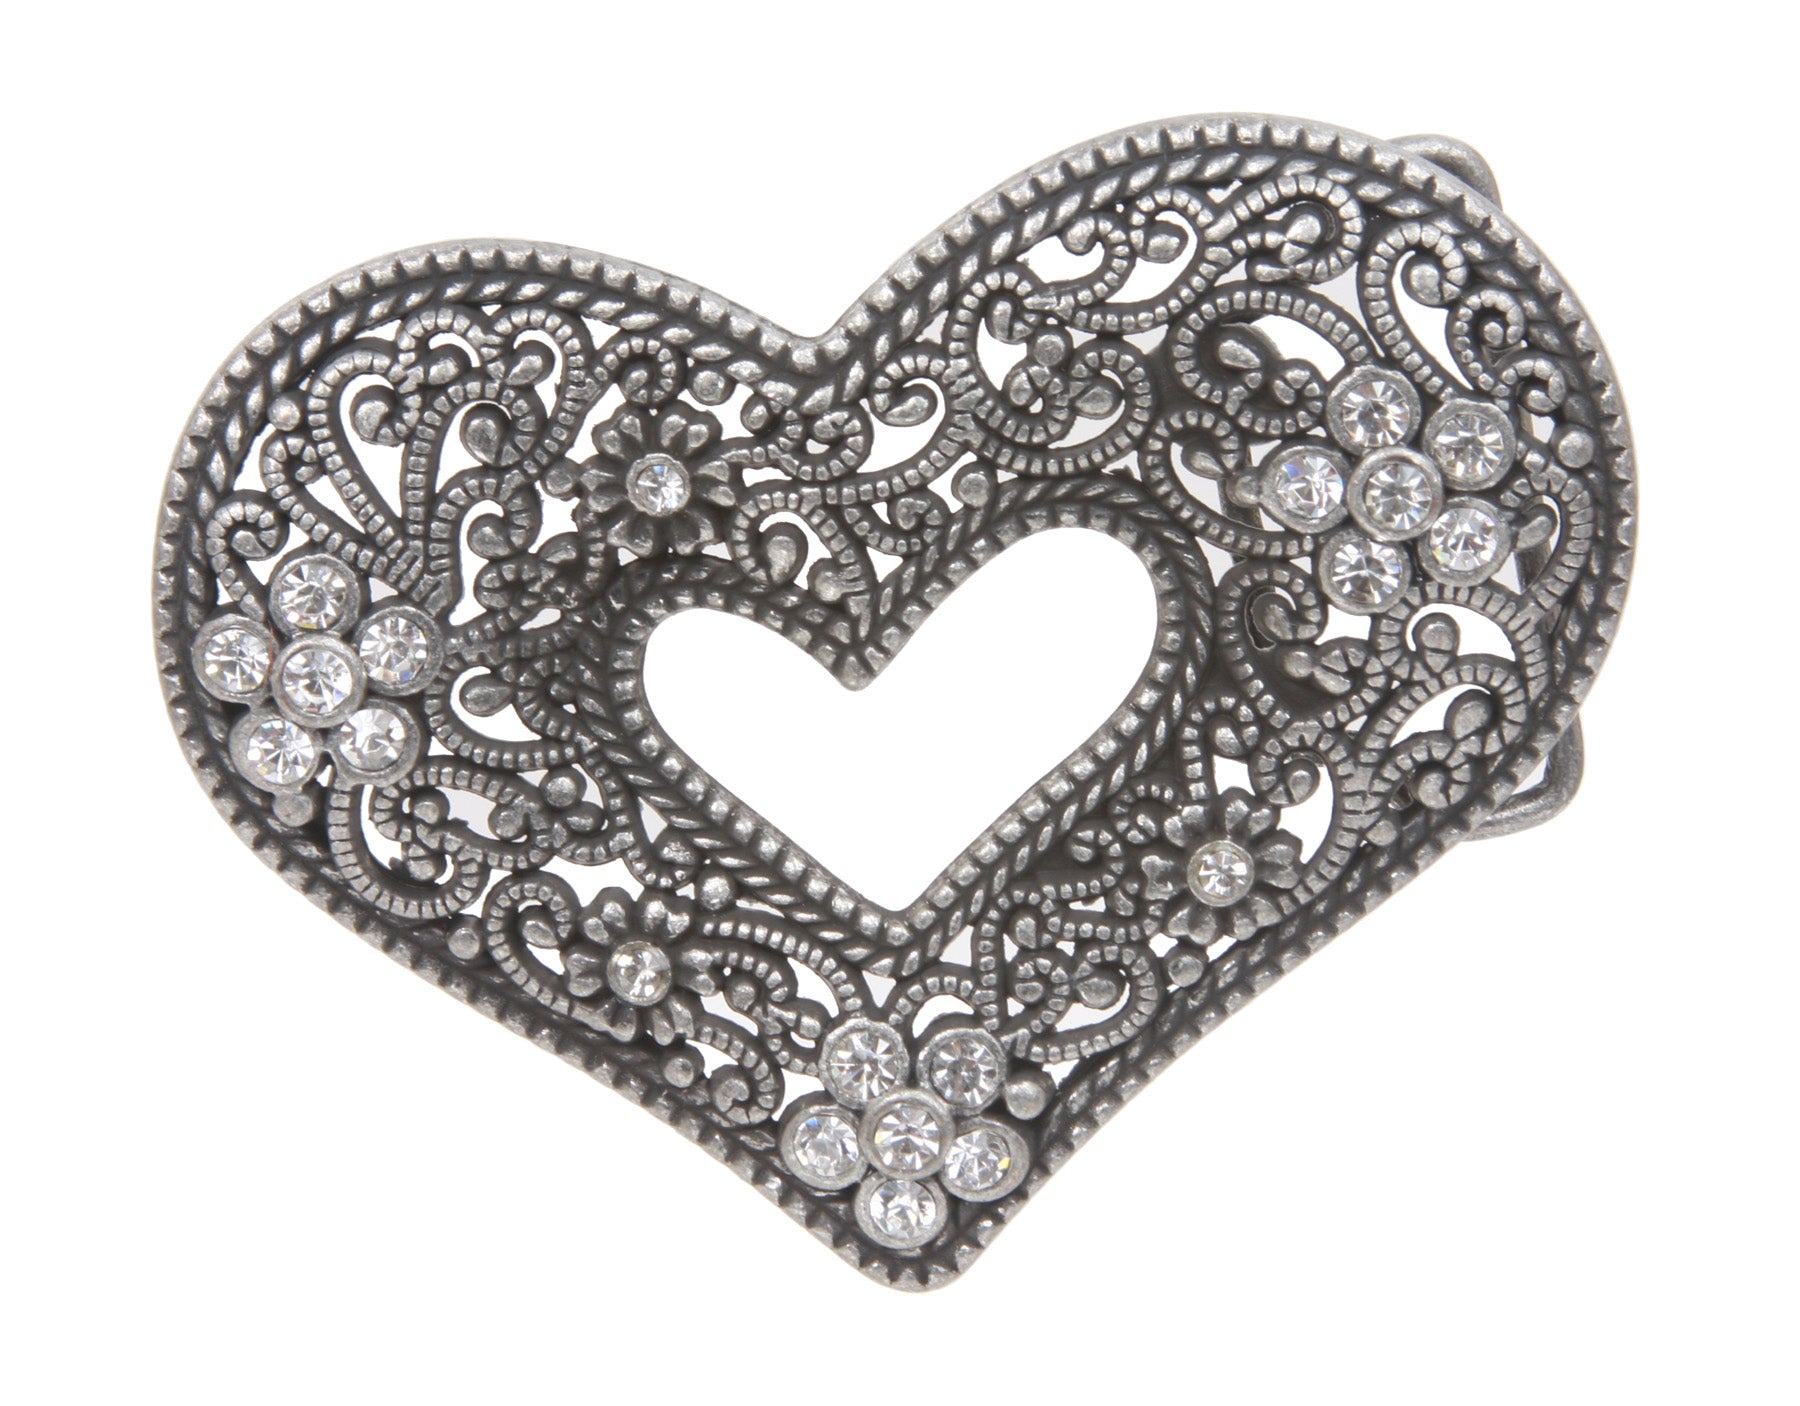 Perforated Rhinestone Heart Flower Hollow Out Laced Belt Buckle